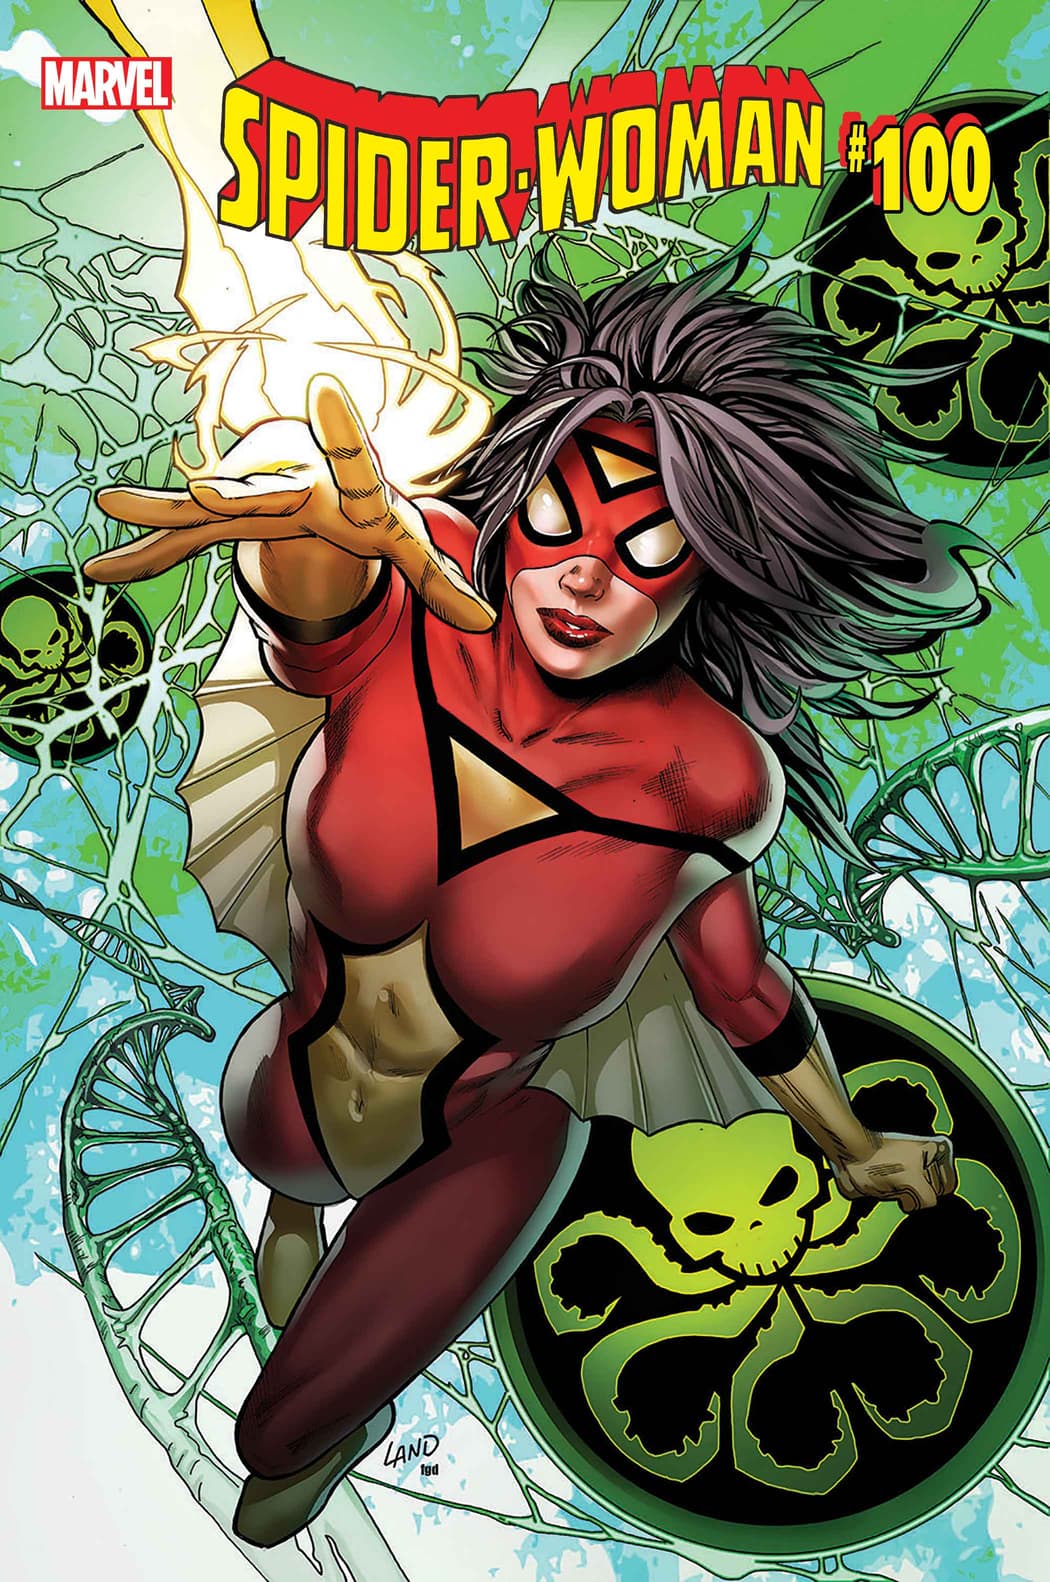 Spider-Woman #100 cover